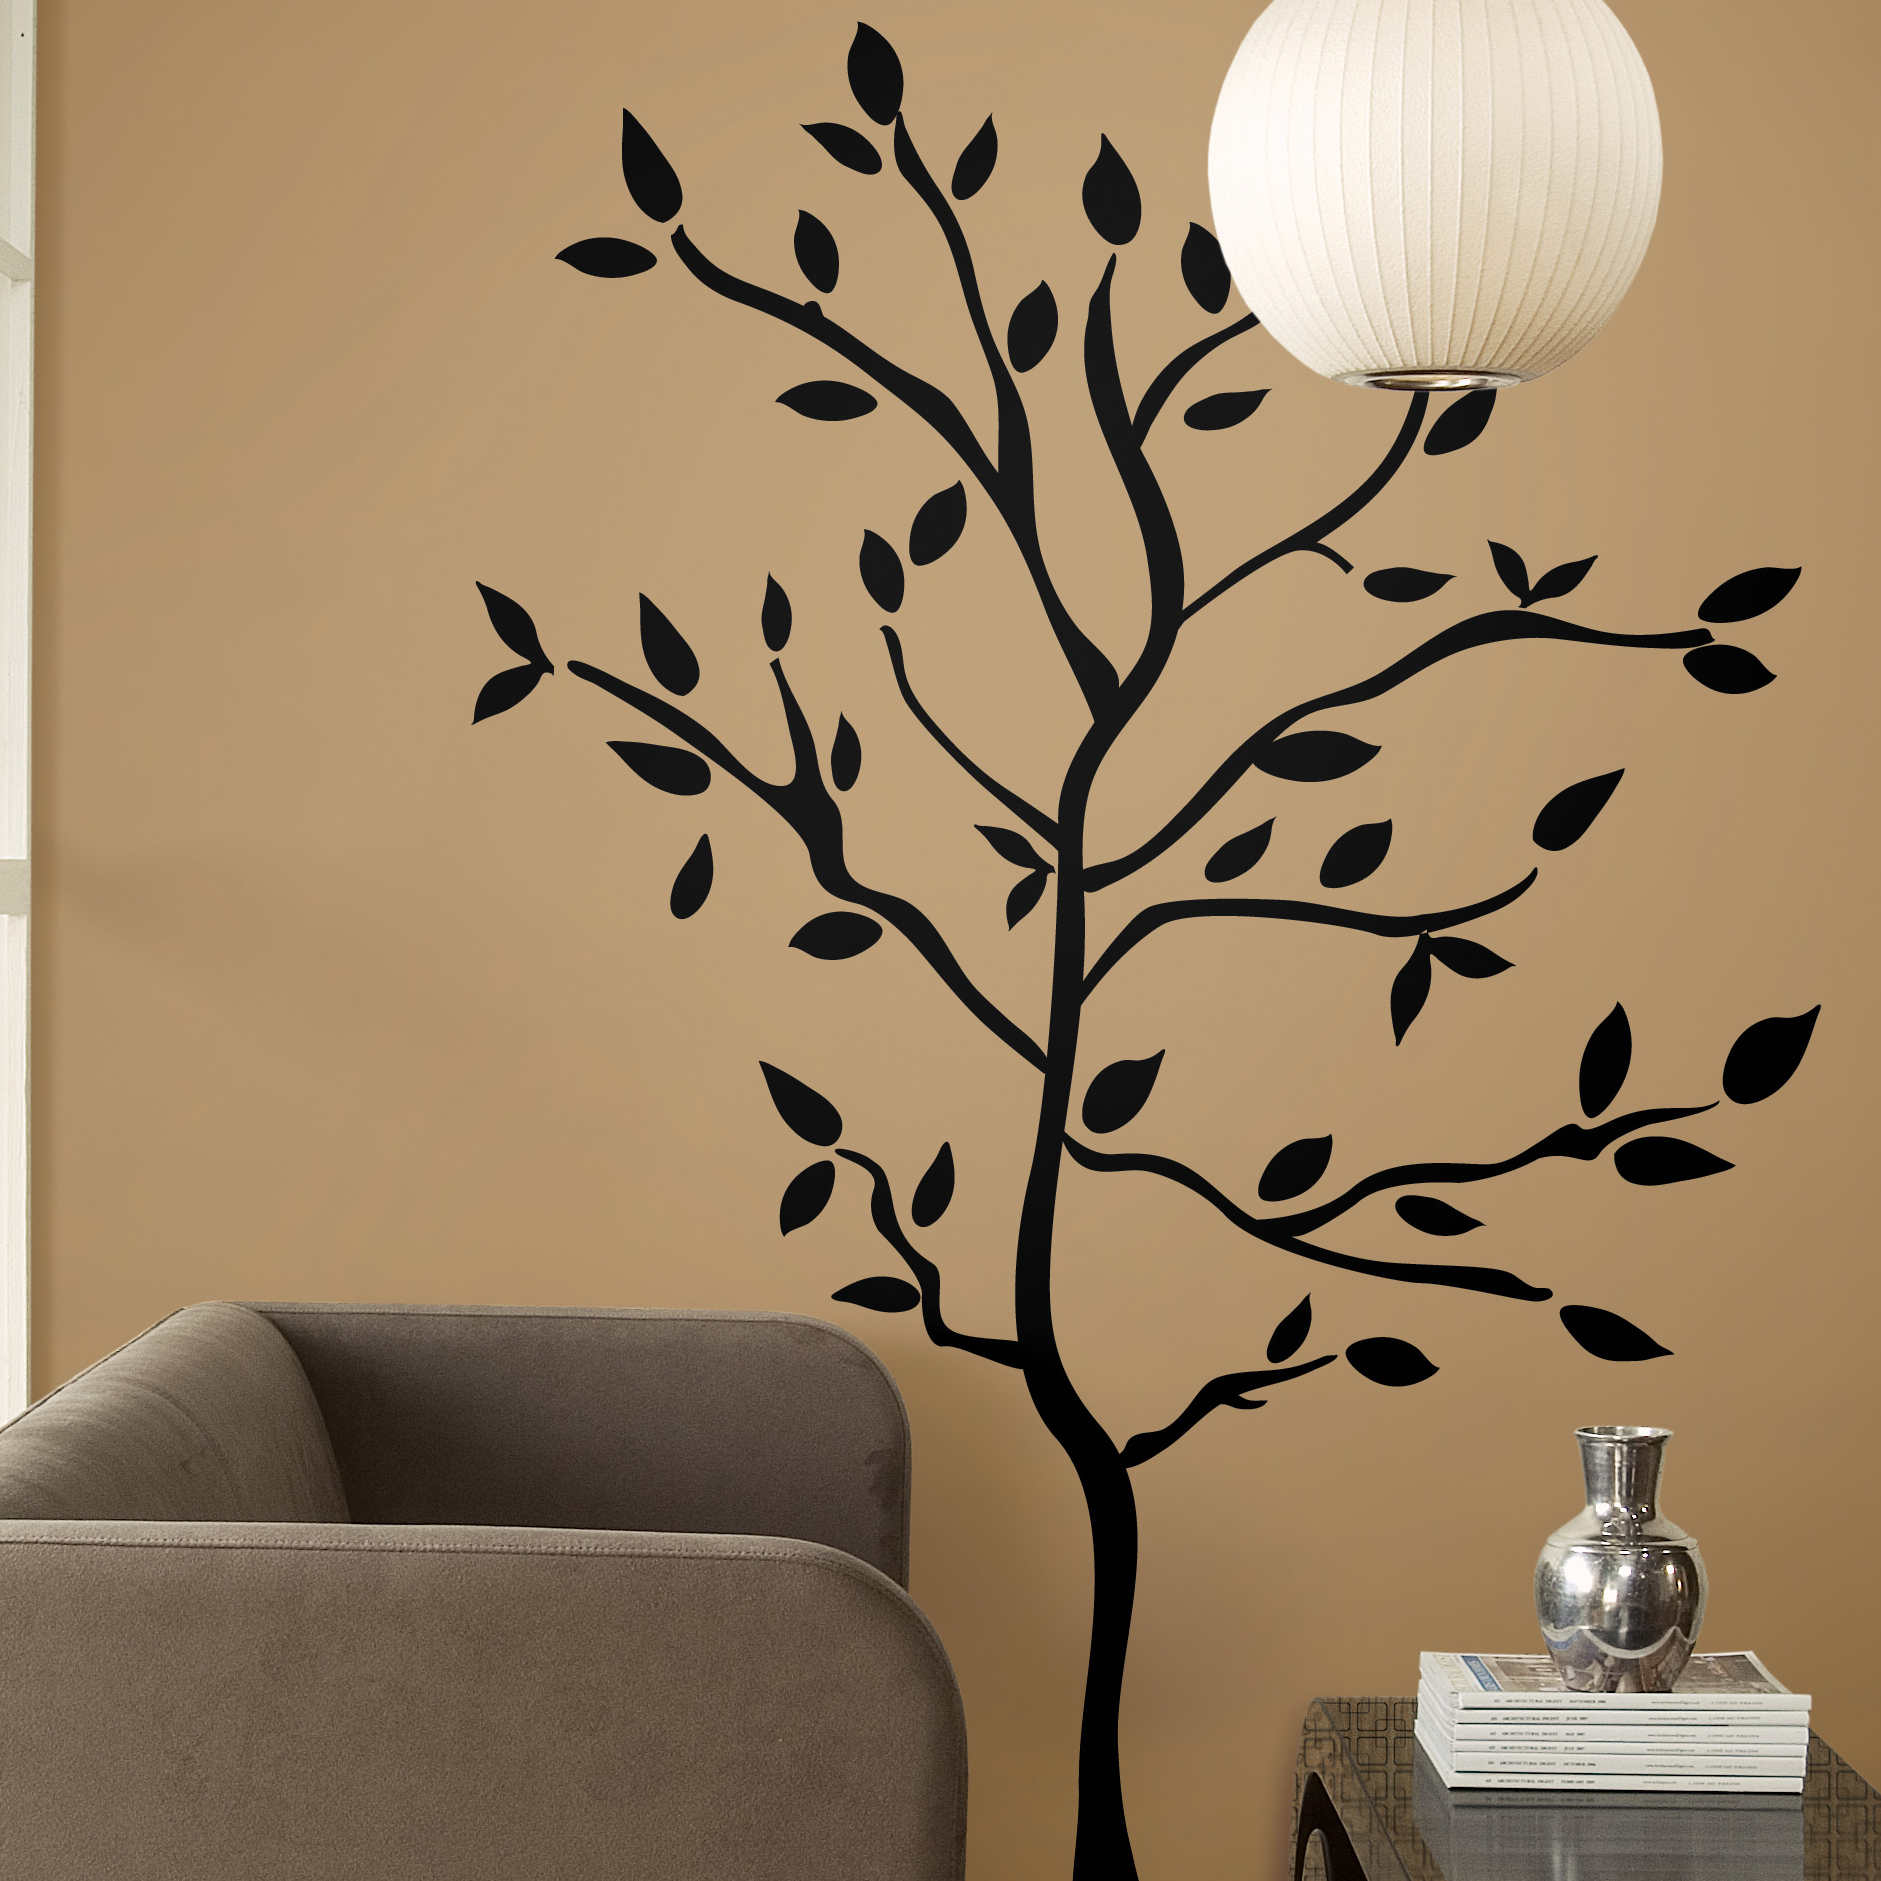 Tree branches mural - RoomMates